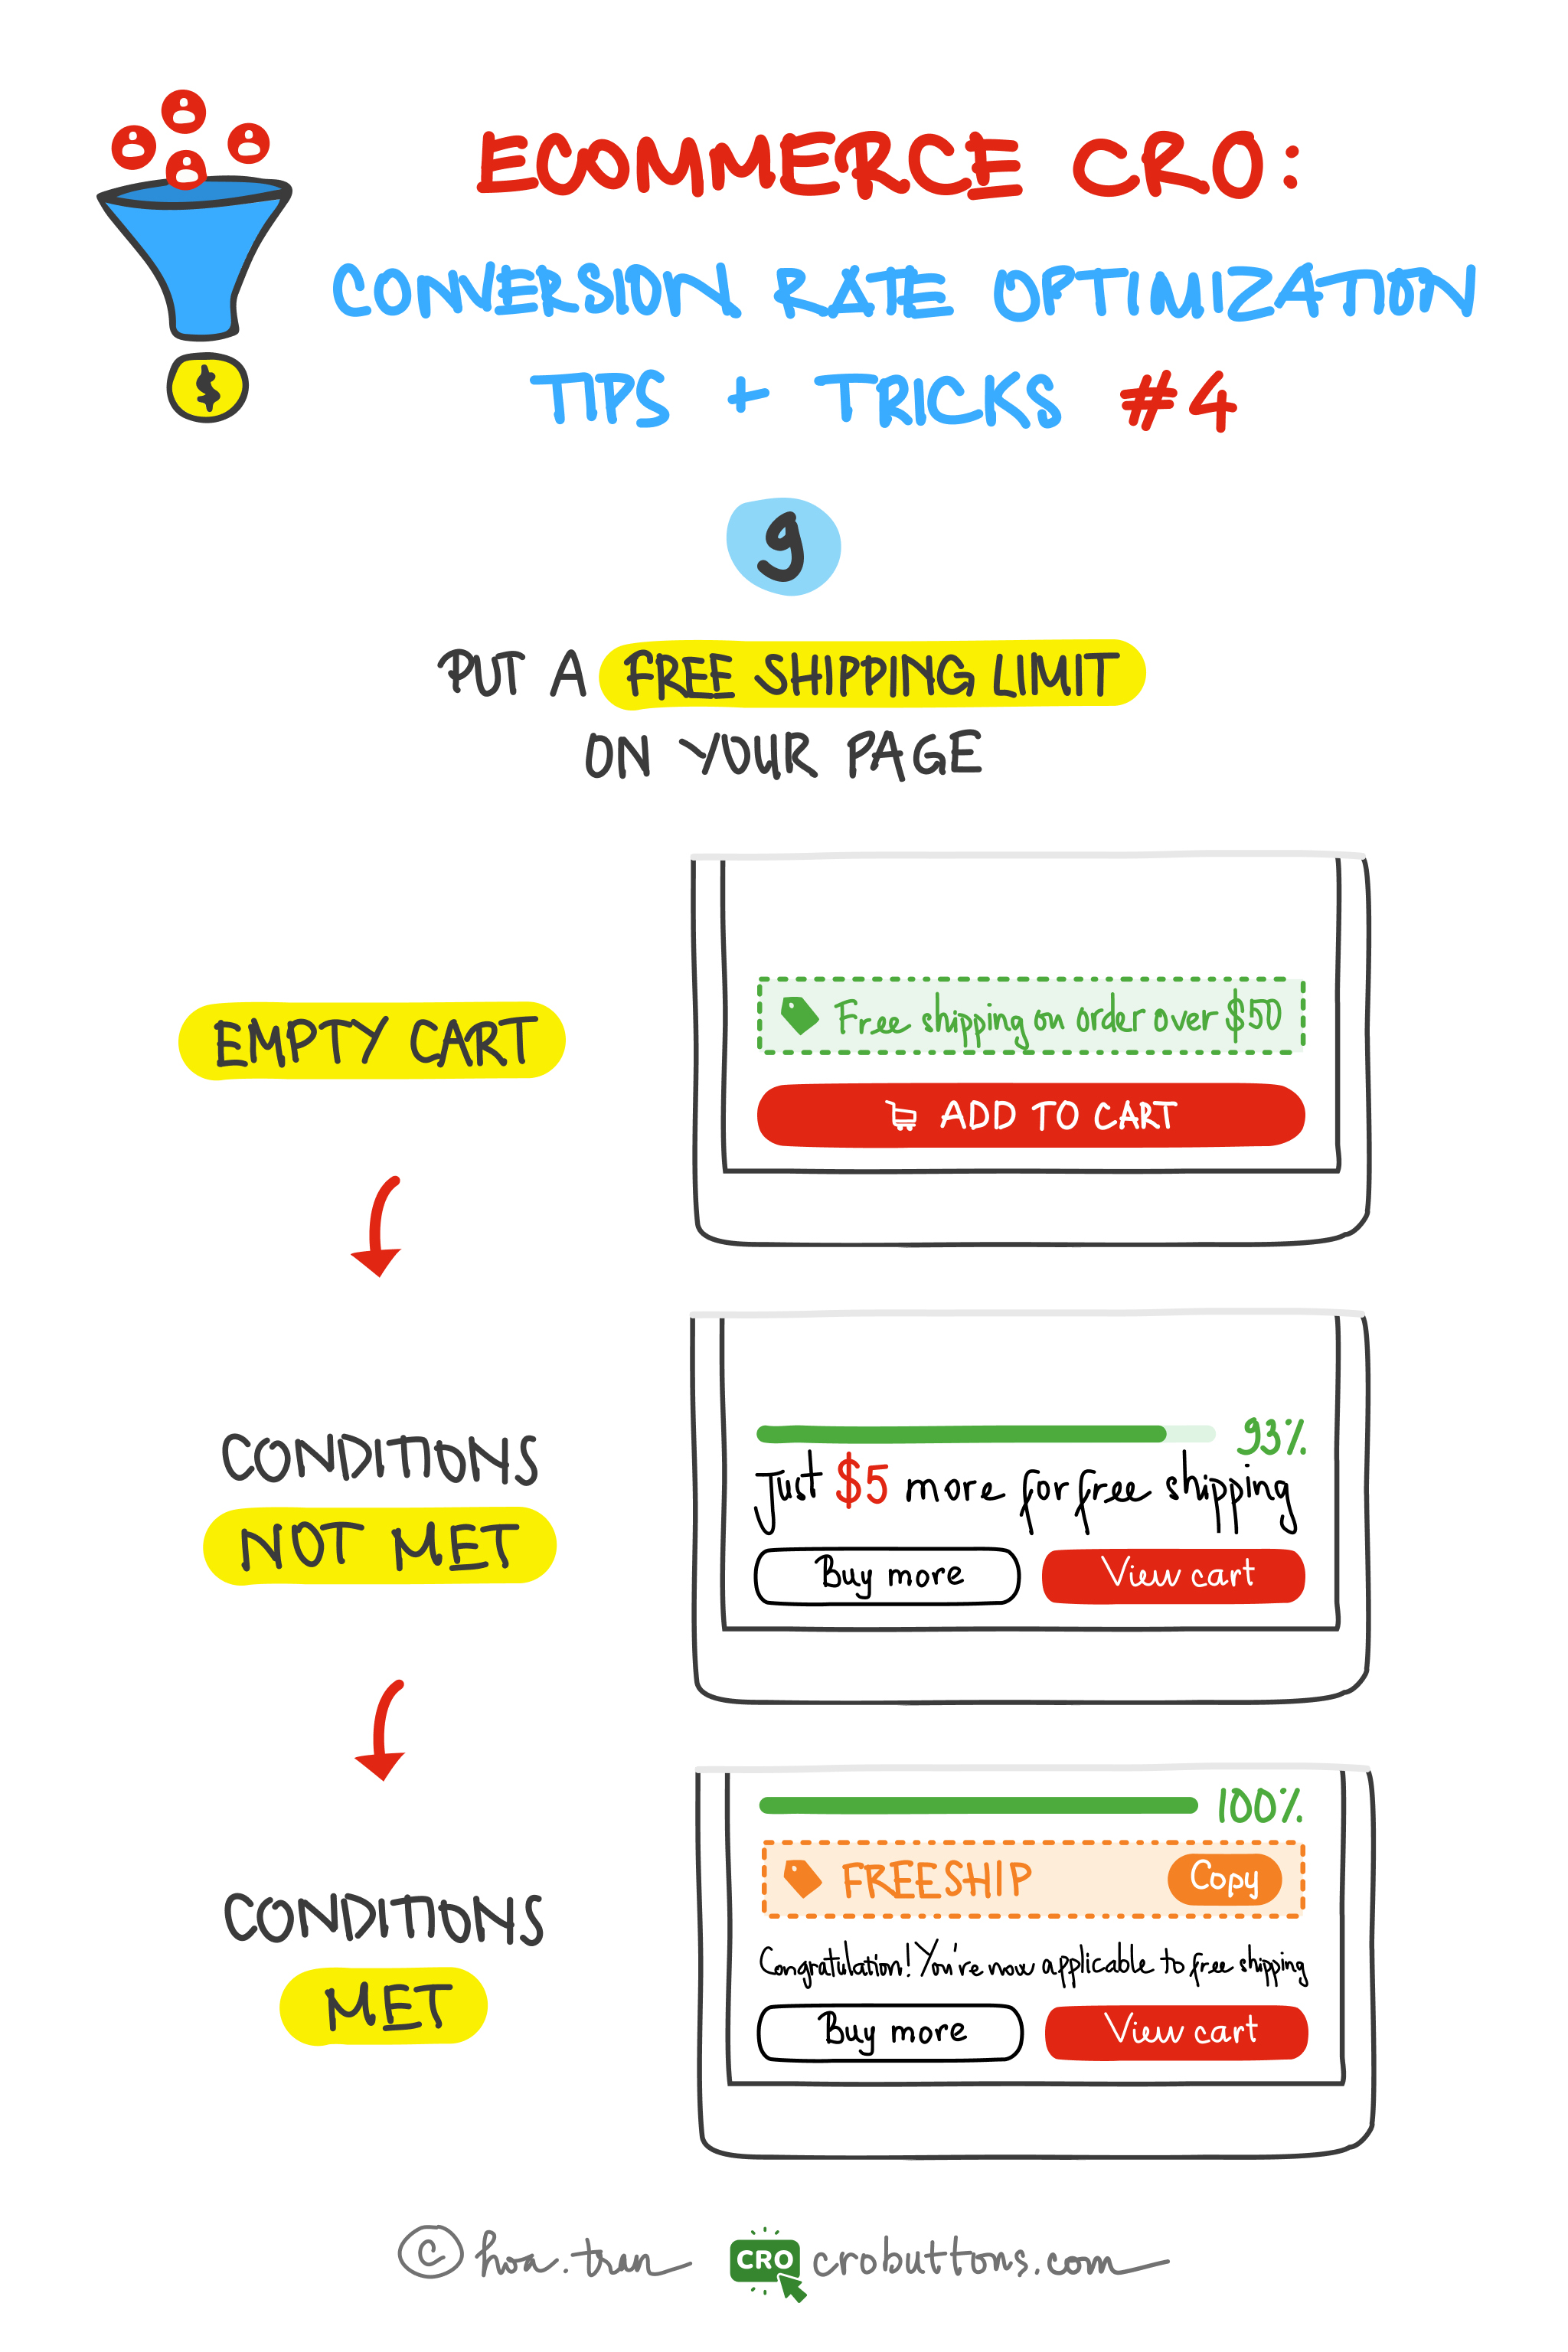 How to use free shipping to boost your sales – eCommerce CRO Tips & Tricks #4